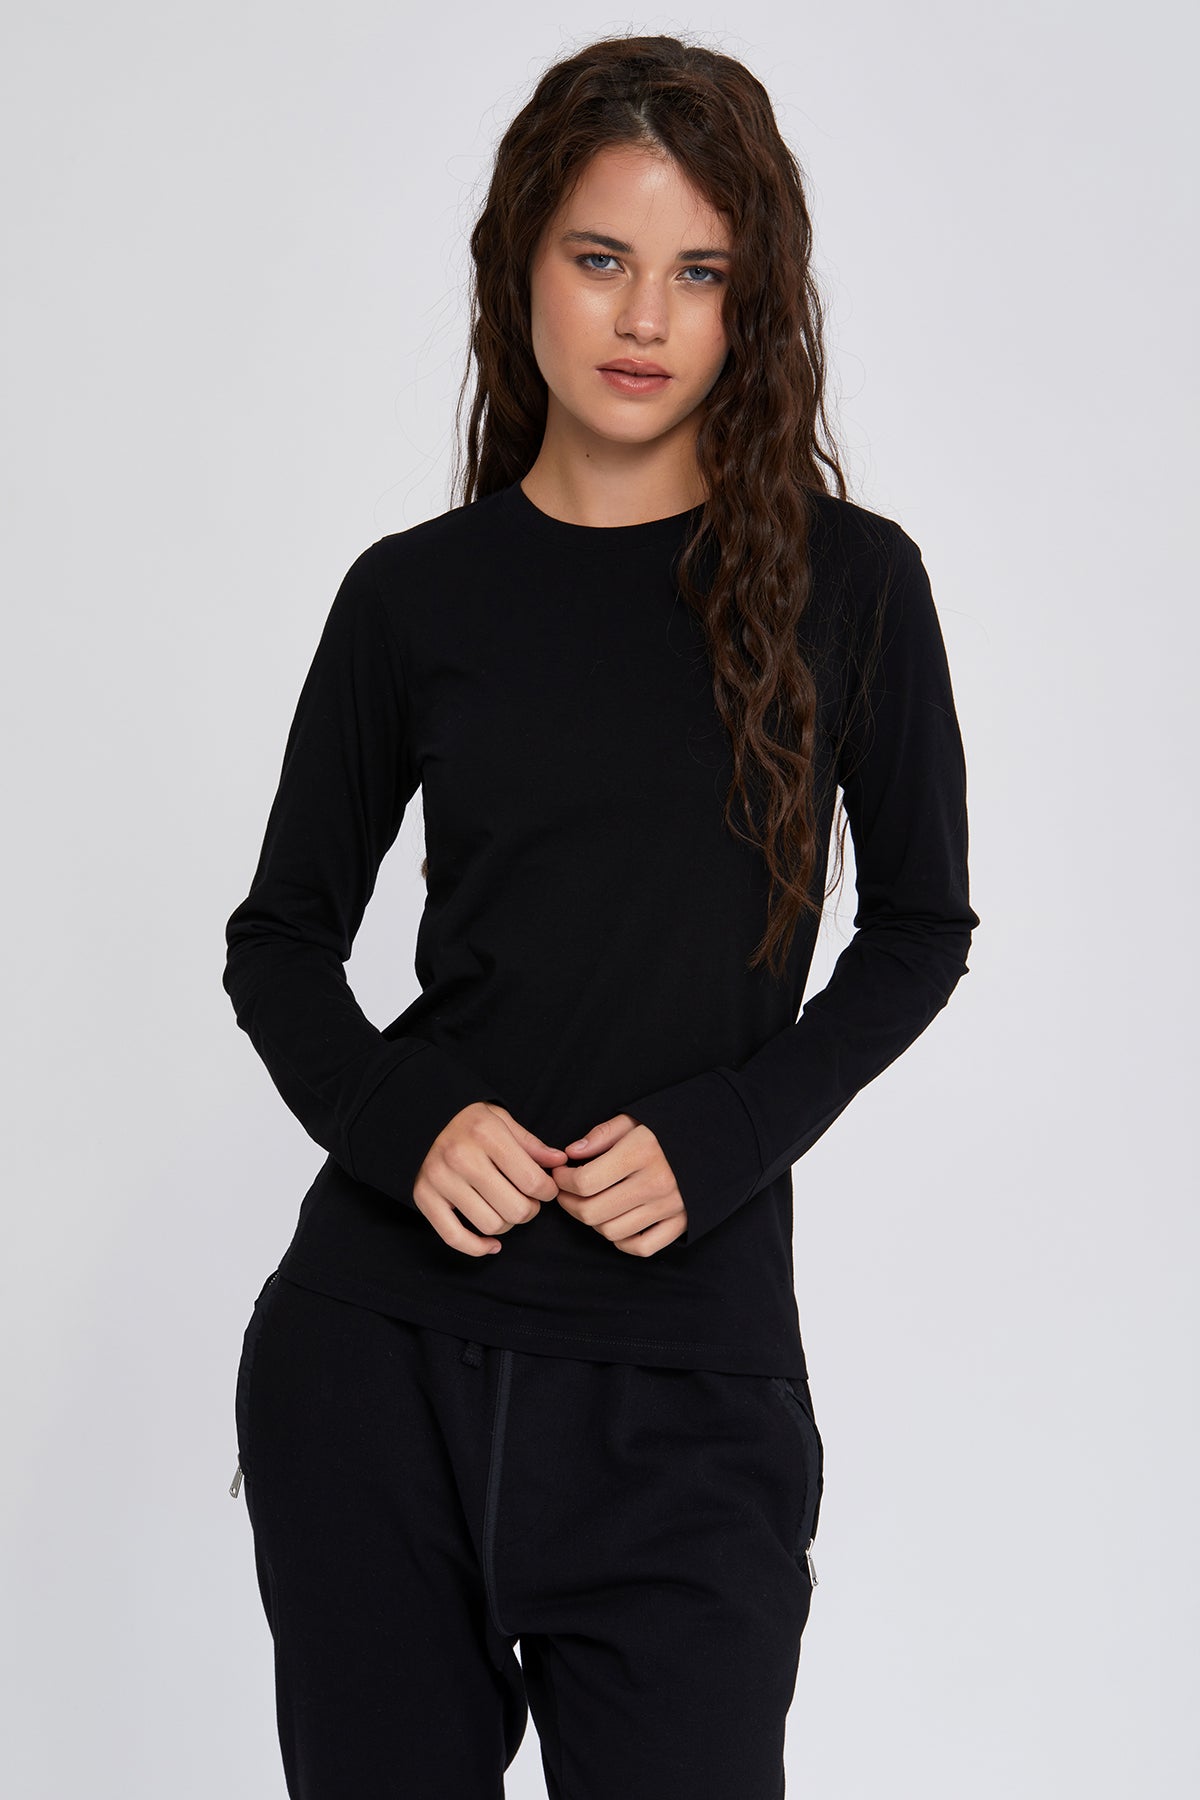 Women's long sleeve t-shirts 100 % great quality Turkish Pima cotton preshrunk. Work to casual , outdoor,  cold weather for all occasions.